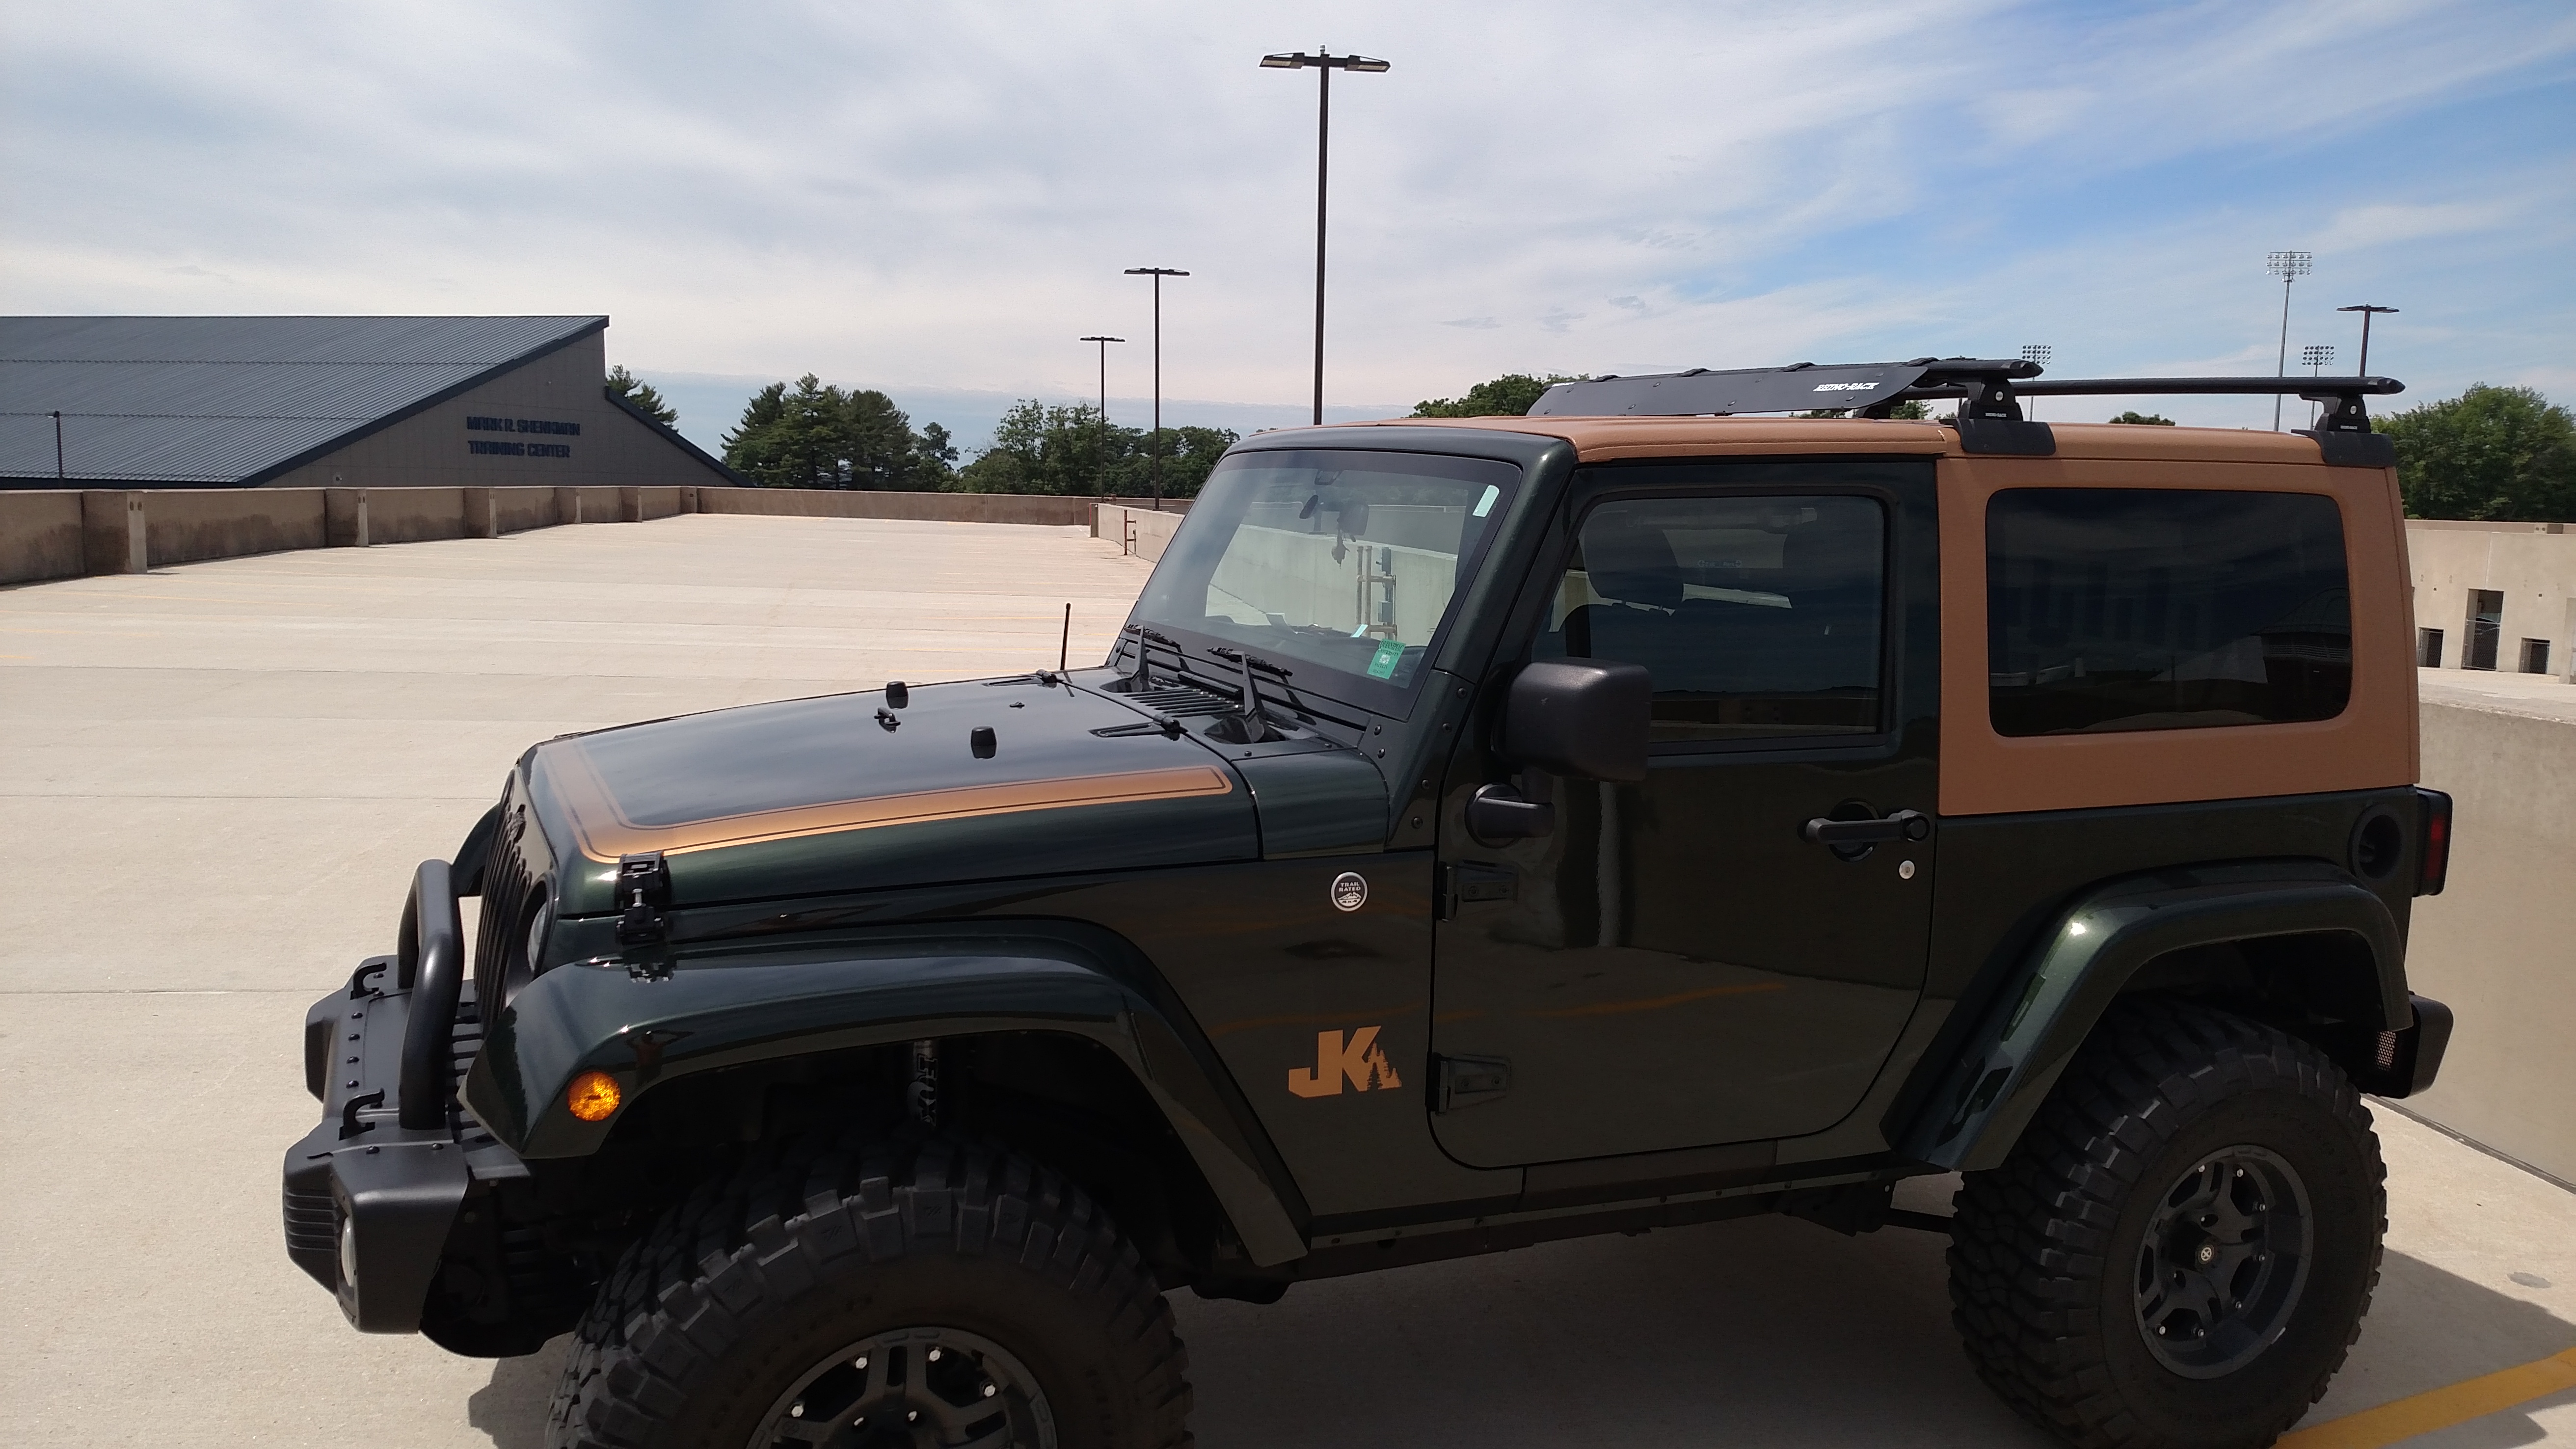 Throwback Green and Tan JK Build  - The top destination for Jeep  JK and JL Wrangler news, rumors, and discussion